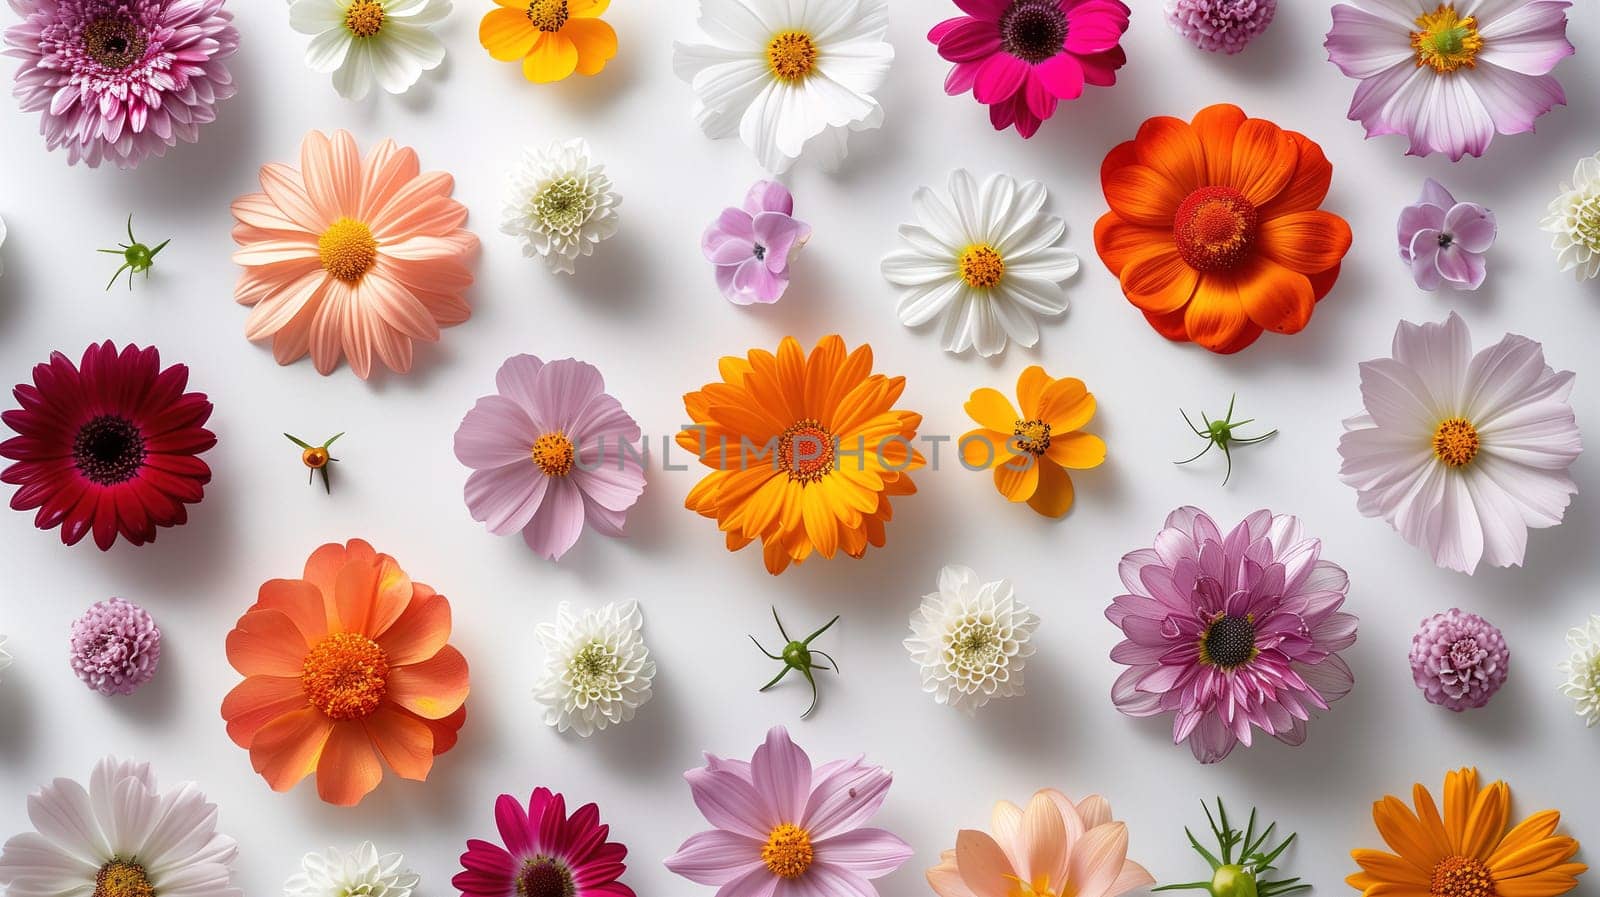 Assorted Colorful Flowers on White Surface by TRMK